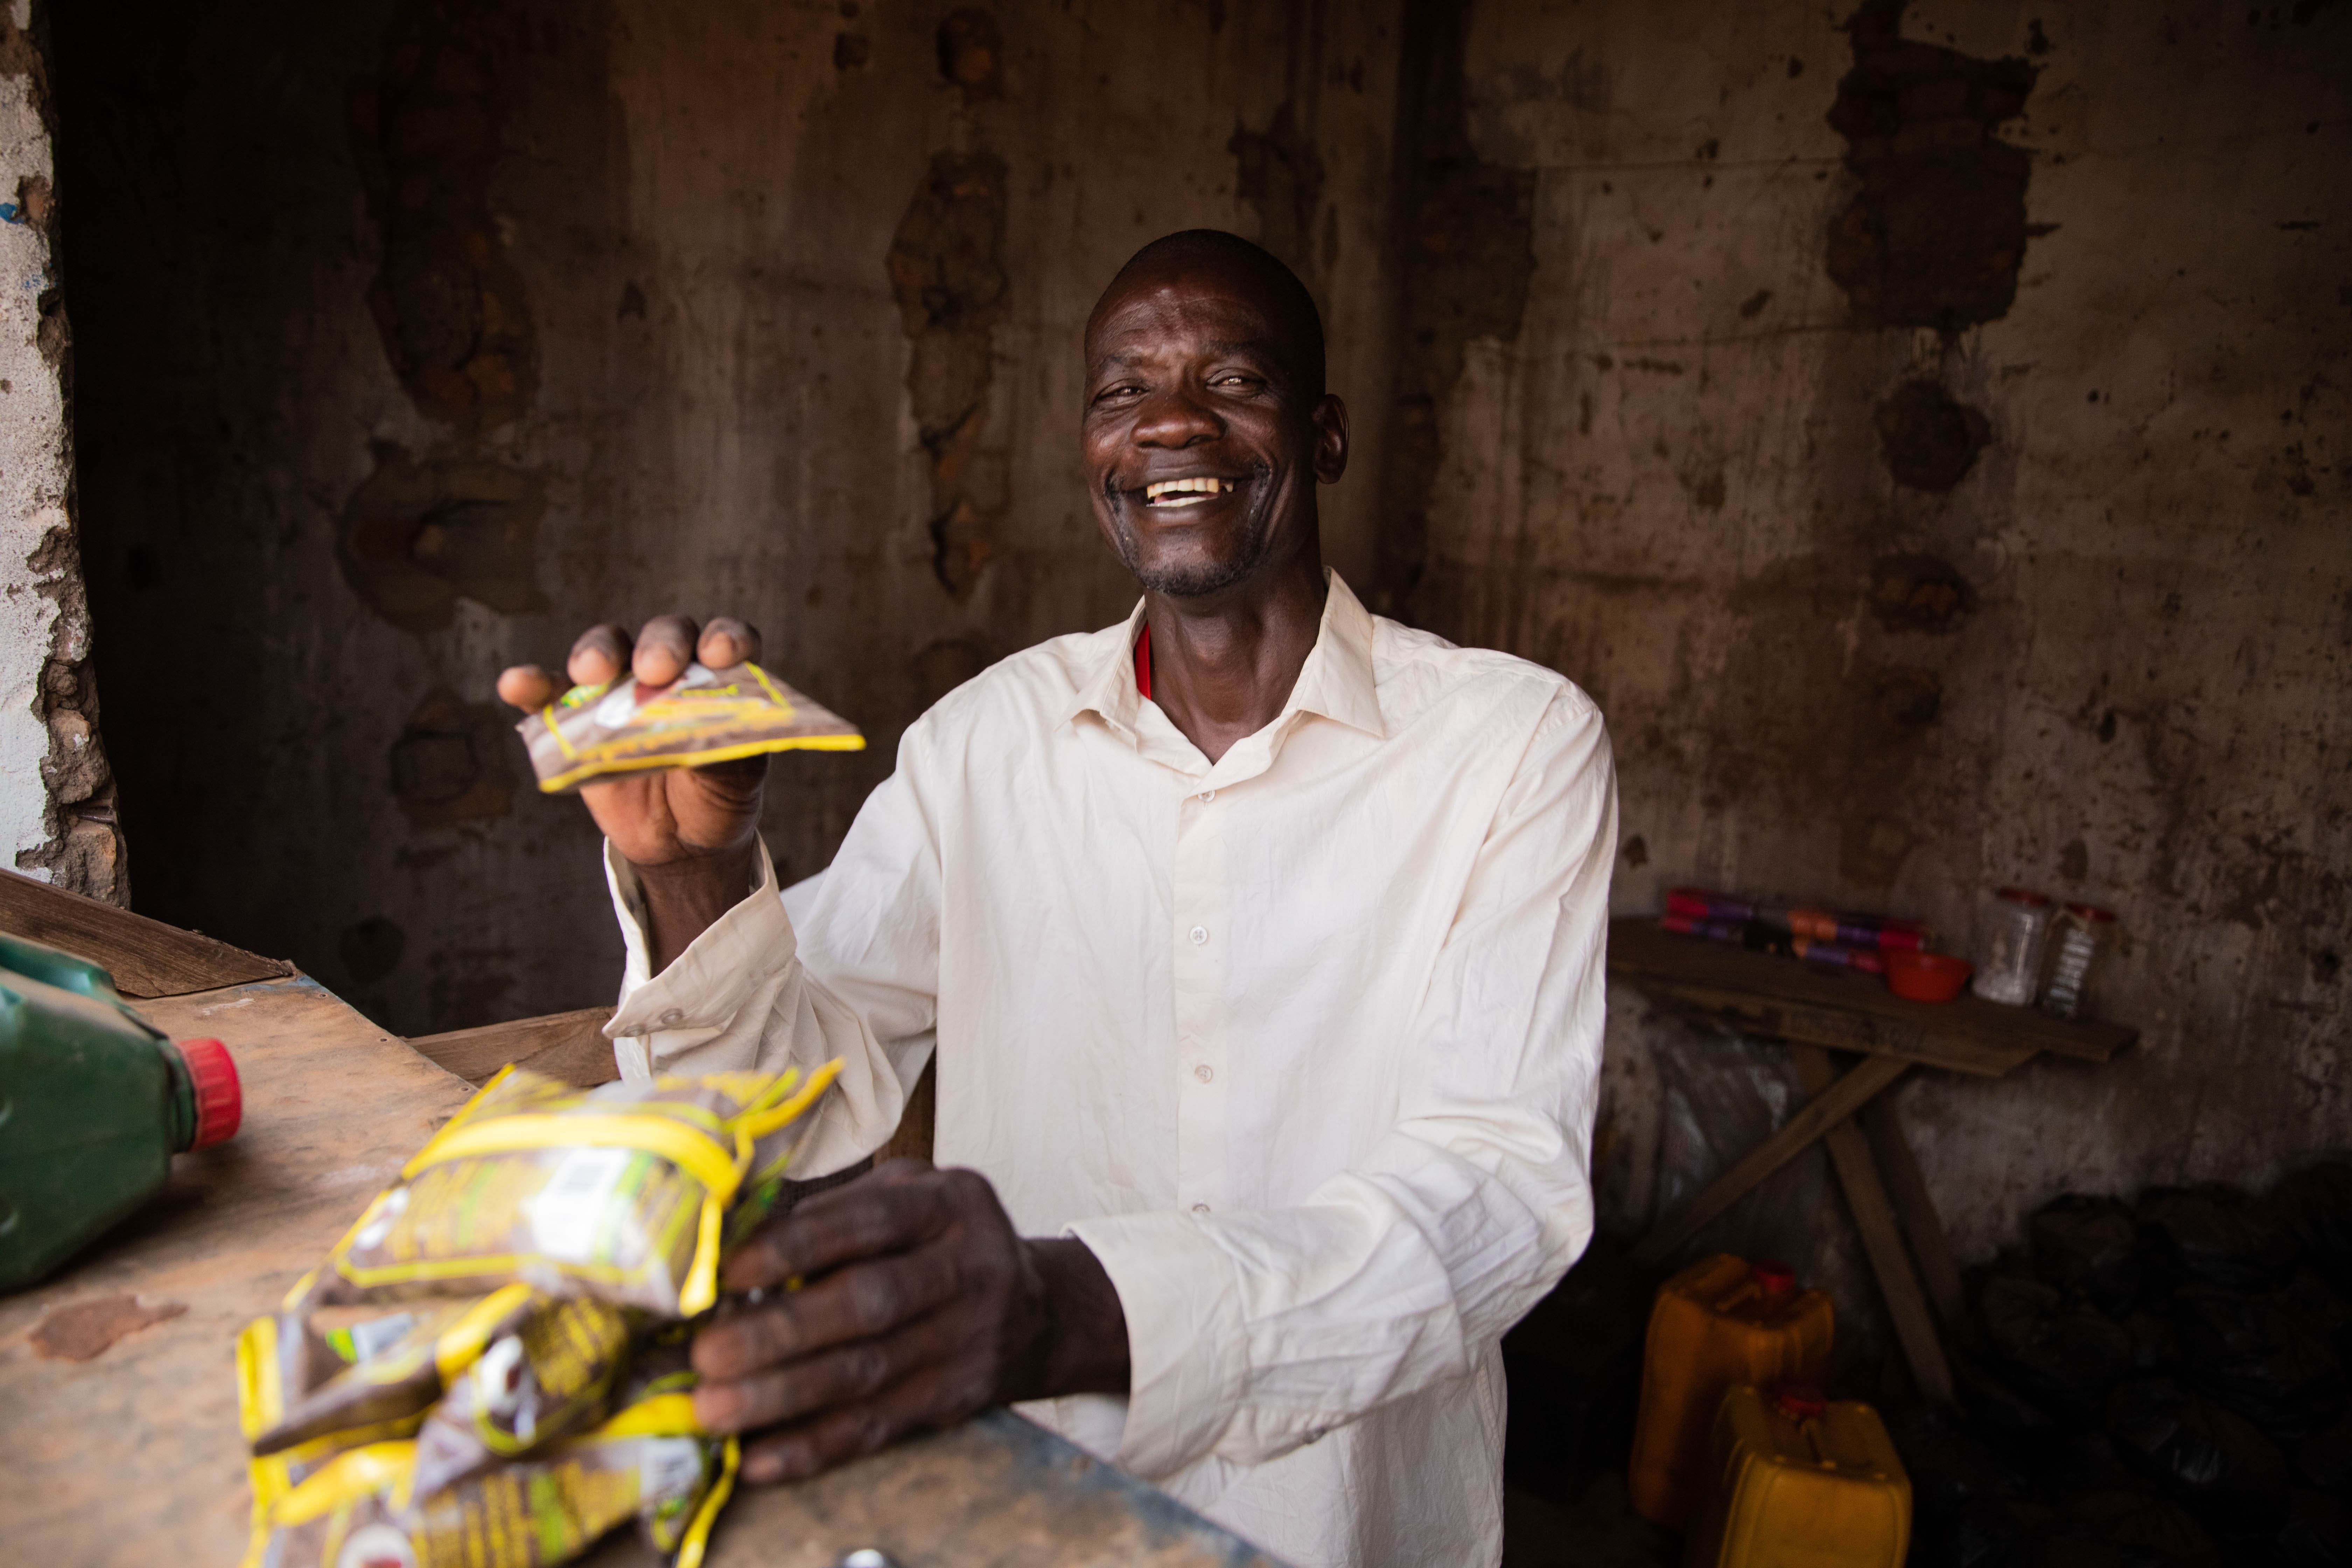 Celebrating OPDs on International Day of People with Disabilities. Peter smiles. He is wearing a pale pink shirt and is holding packets of food, which are brown and yellow. We can see some tools around him.